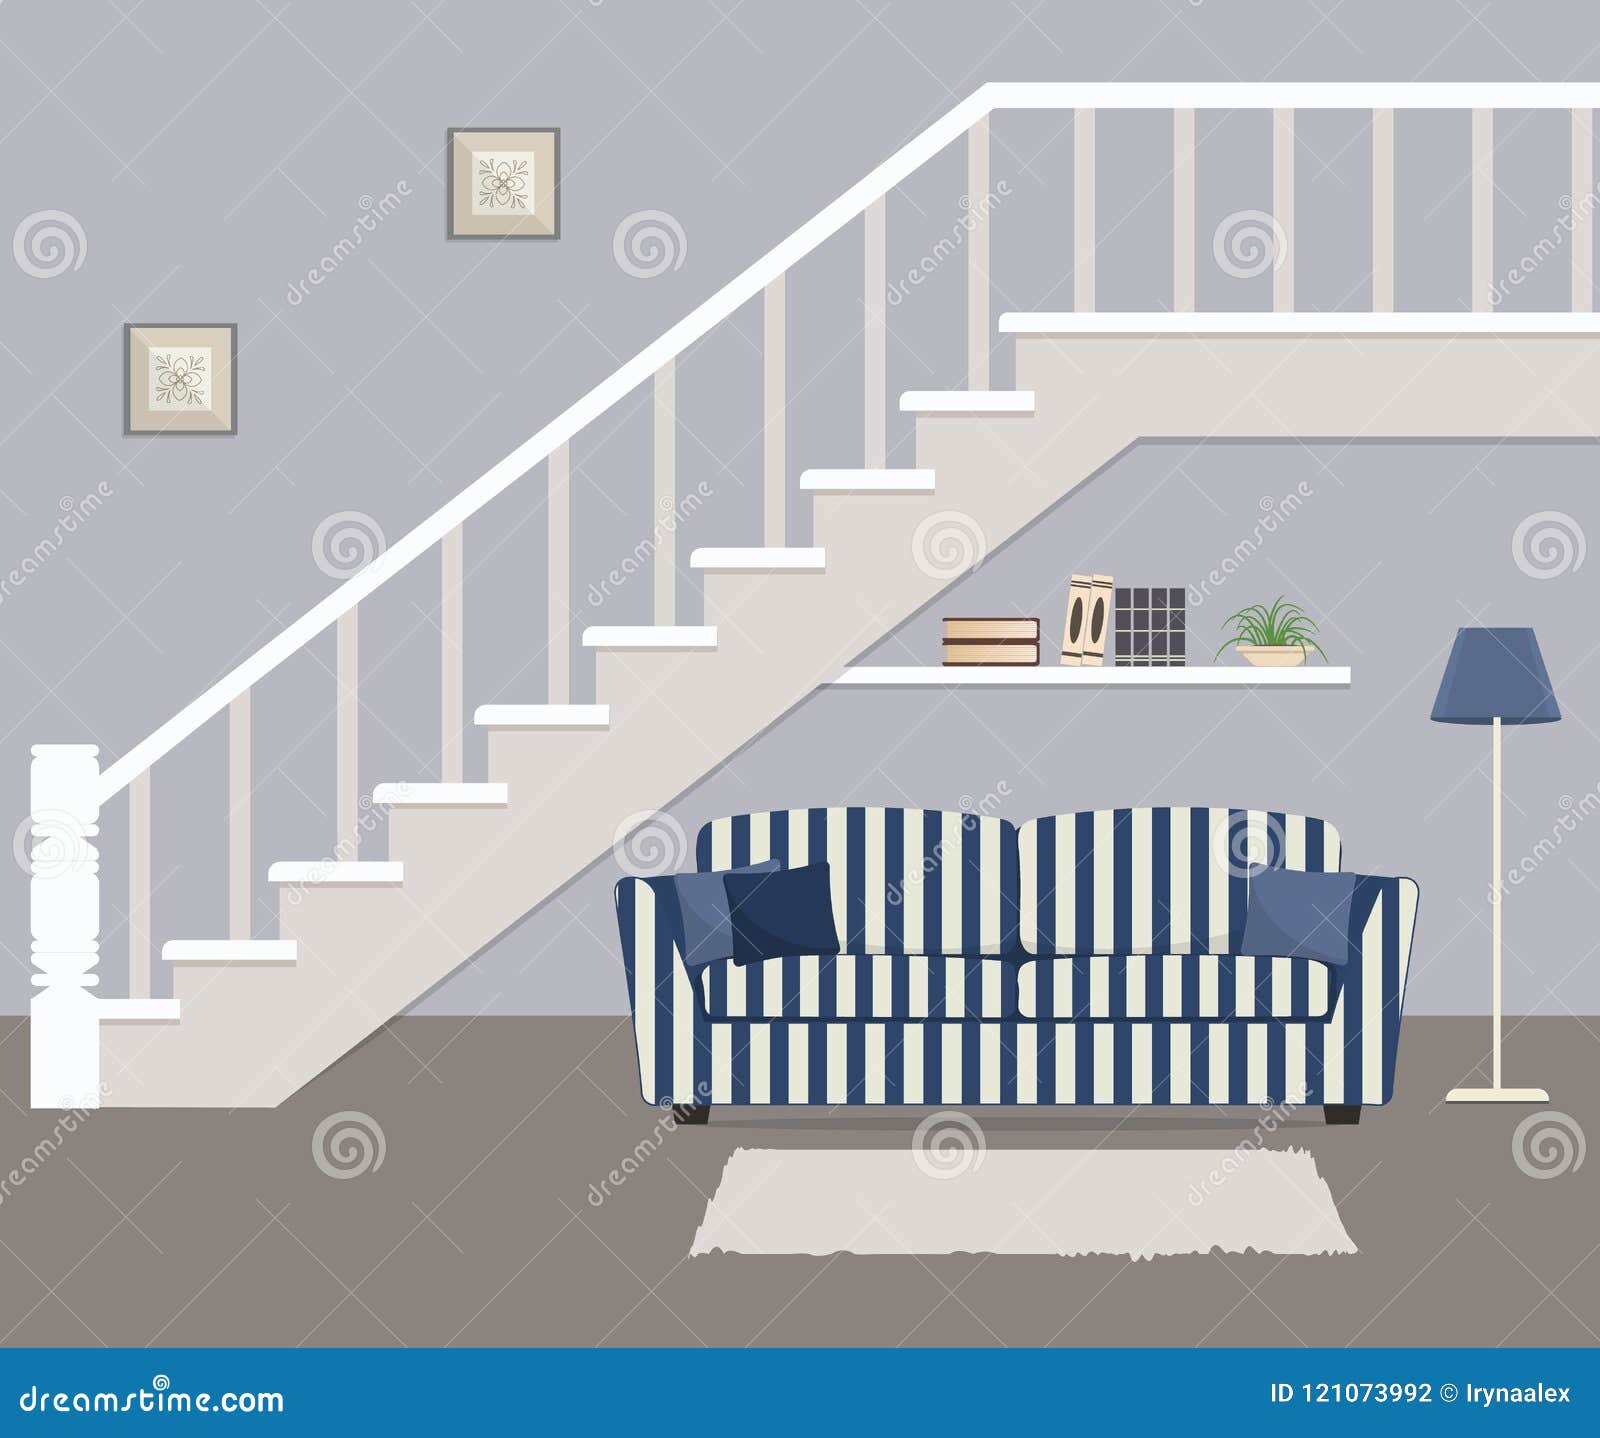 Striped Blue Sofa With Pillows Located Under The Stairs Stock